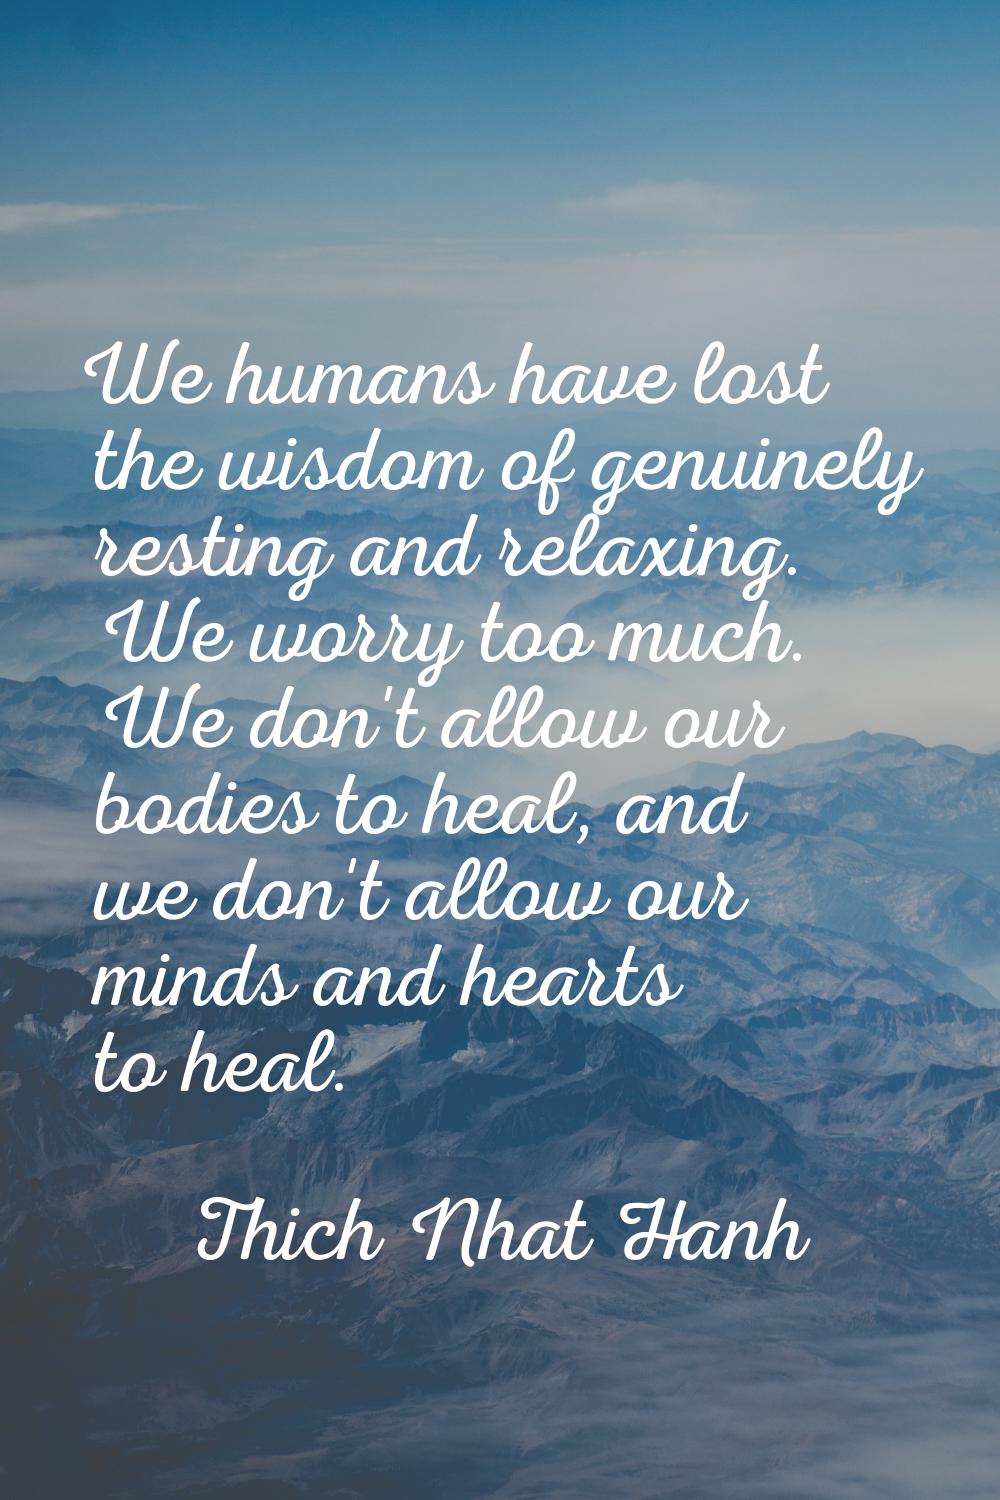 We humans have lost the wisdom of genuinely resting and relaxing. We worry too much. We don't allow